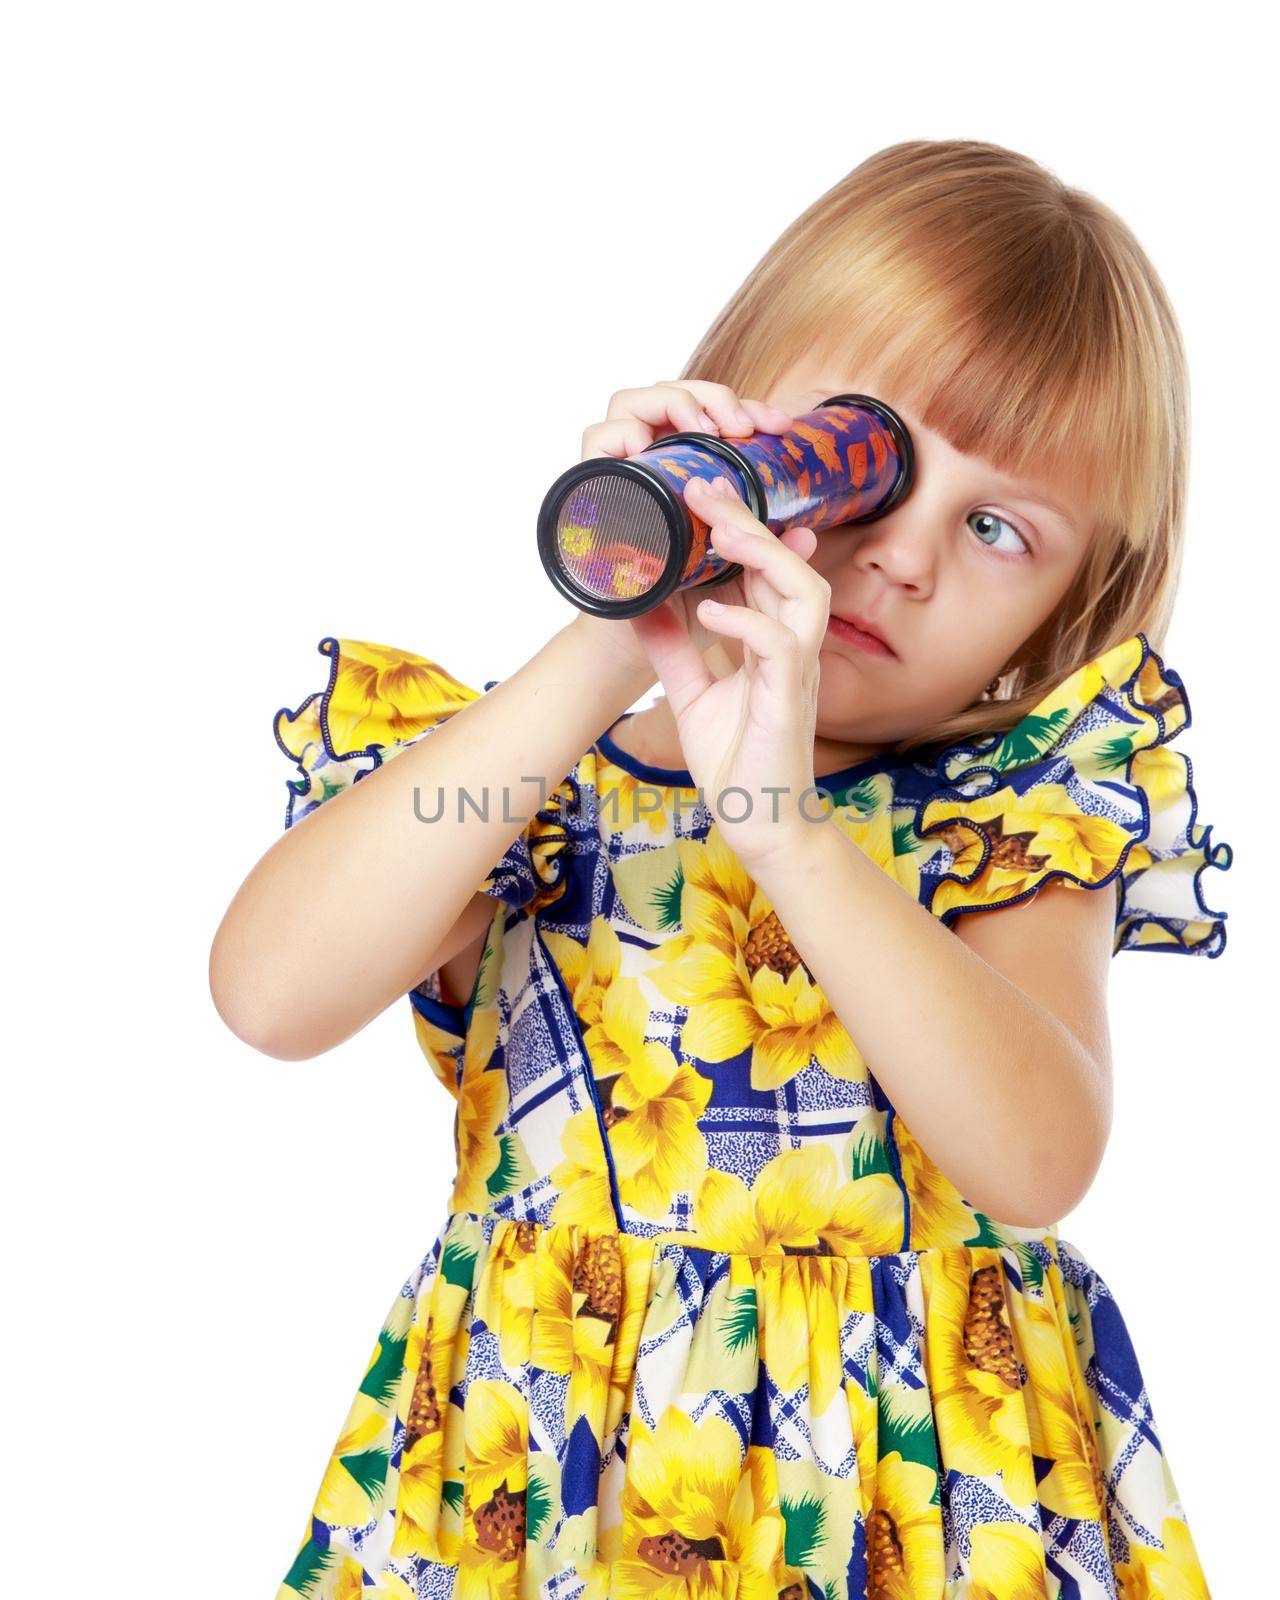 A cute little girl looks enthusiastically through a telescope, or into a kaleidoscope. Education concept.Isolated on white background.